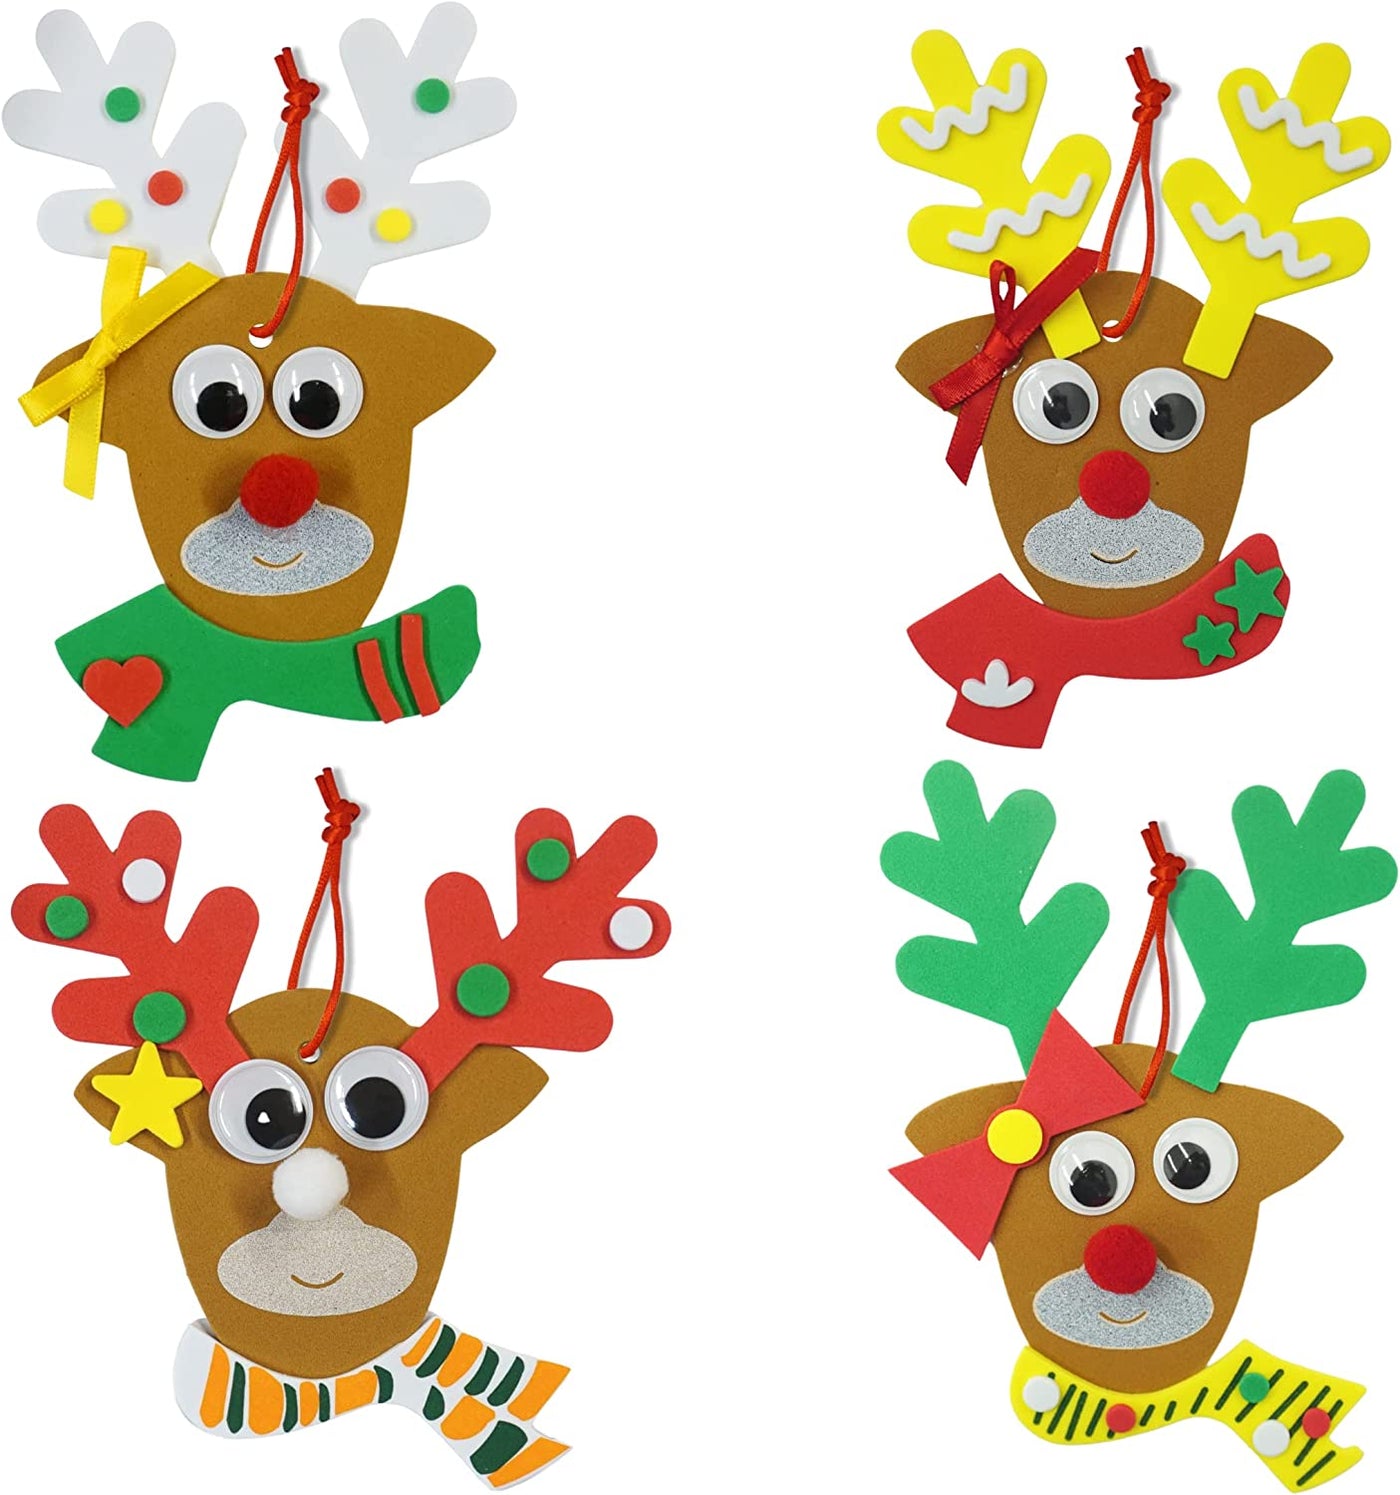 4E's Novelty Reindeer Christmas Ornament Craft for Kids (12 Pack) Updated Edition - Foam Bulk Arts and Crafts Kit for Kids Toddlers 2-4 4-8 DIY Craft Party Favor Activity Project